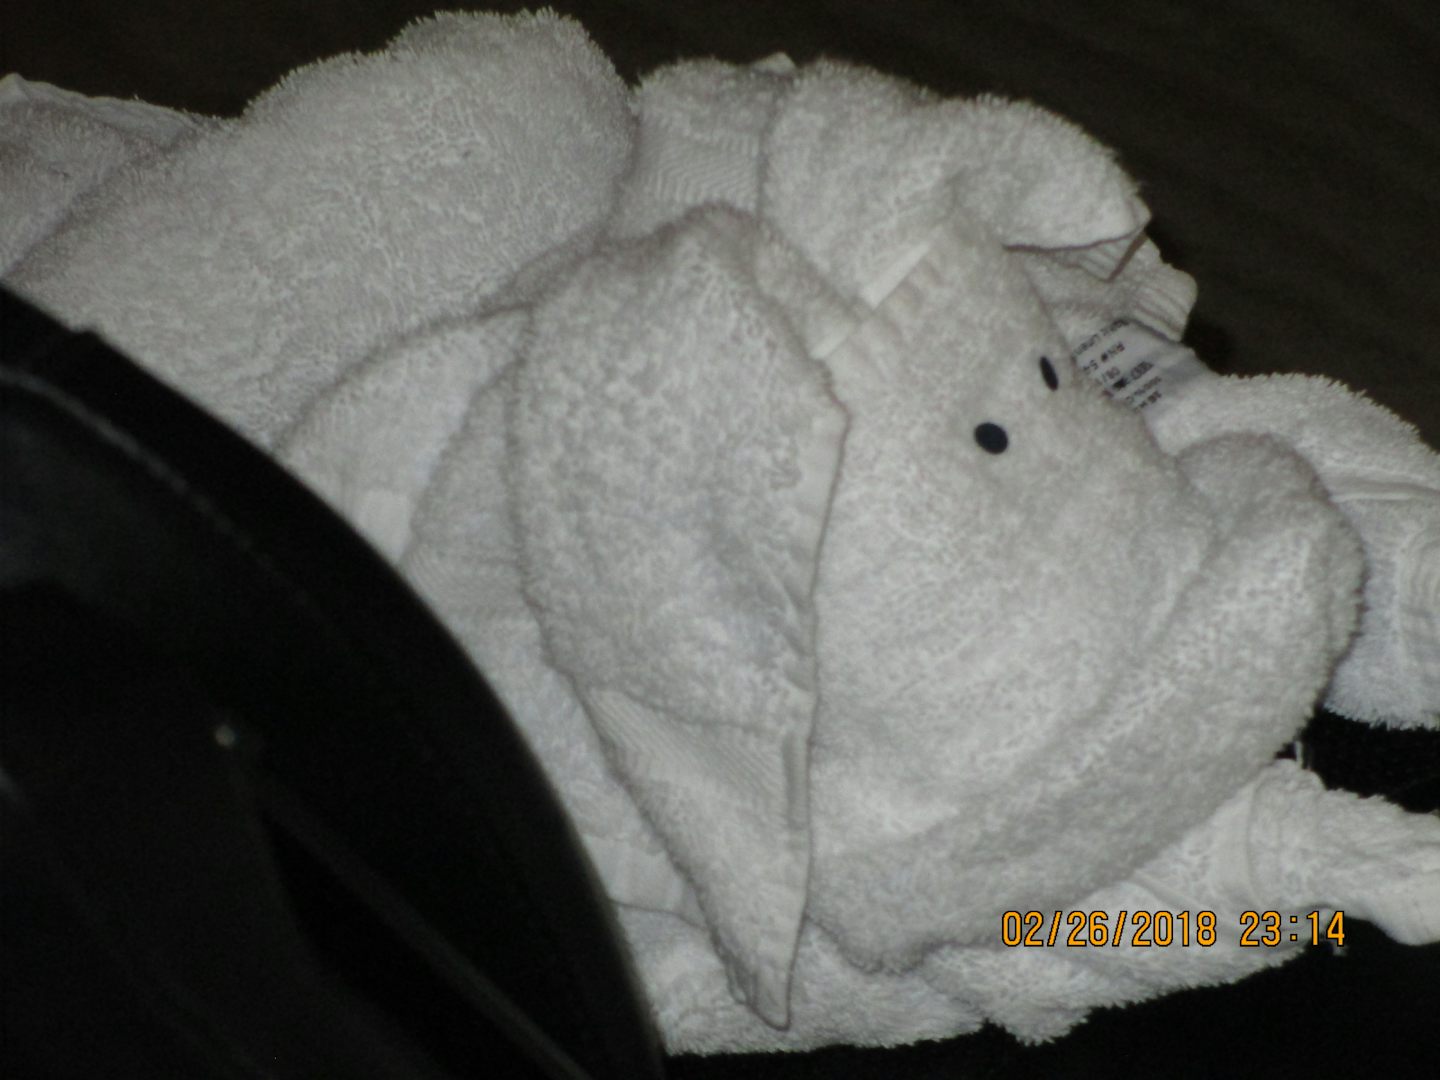 A towel animal, in our cabin